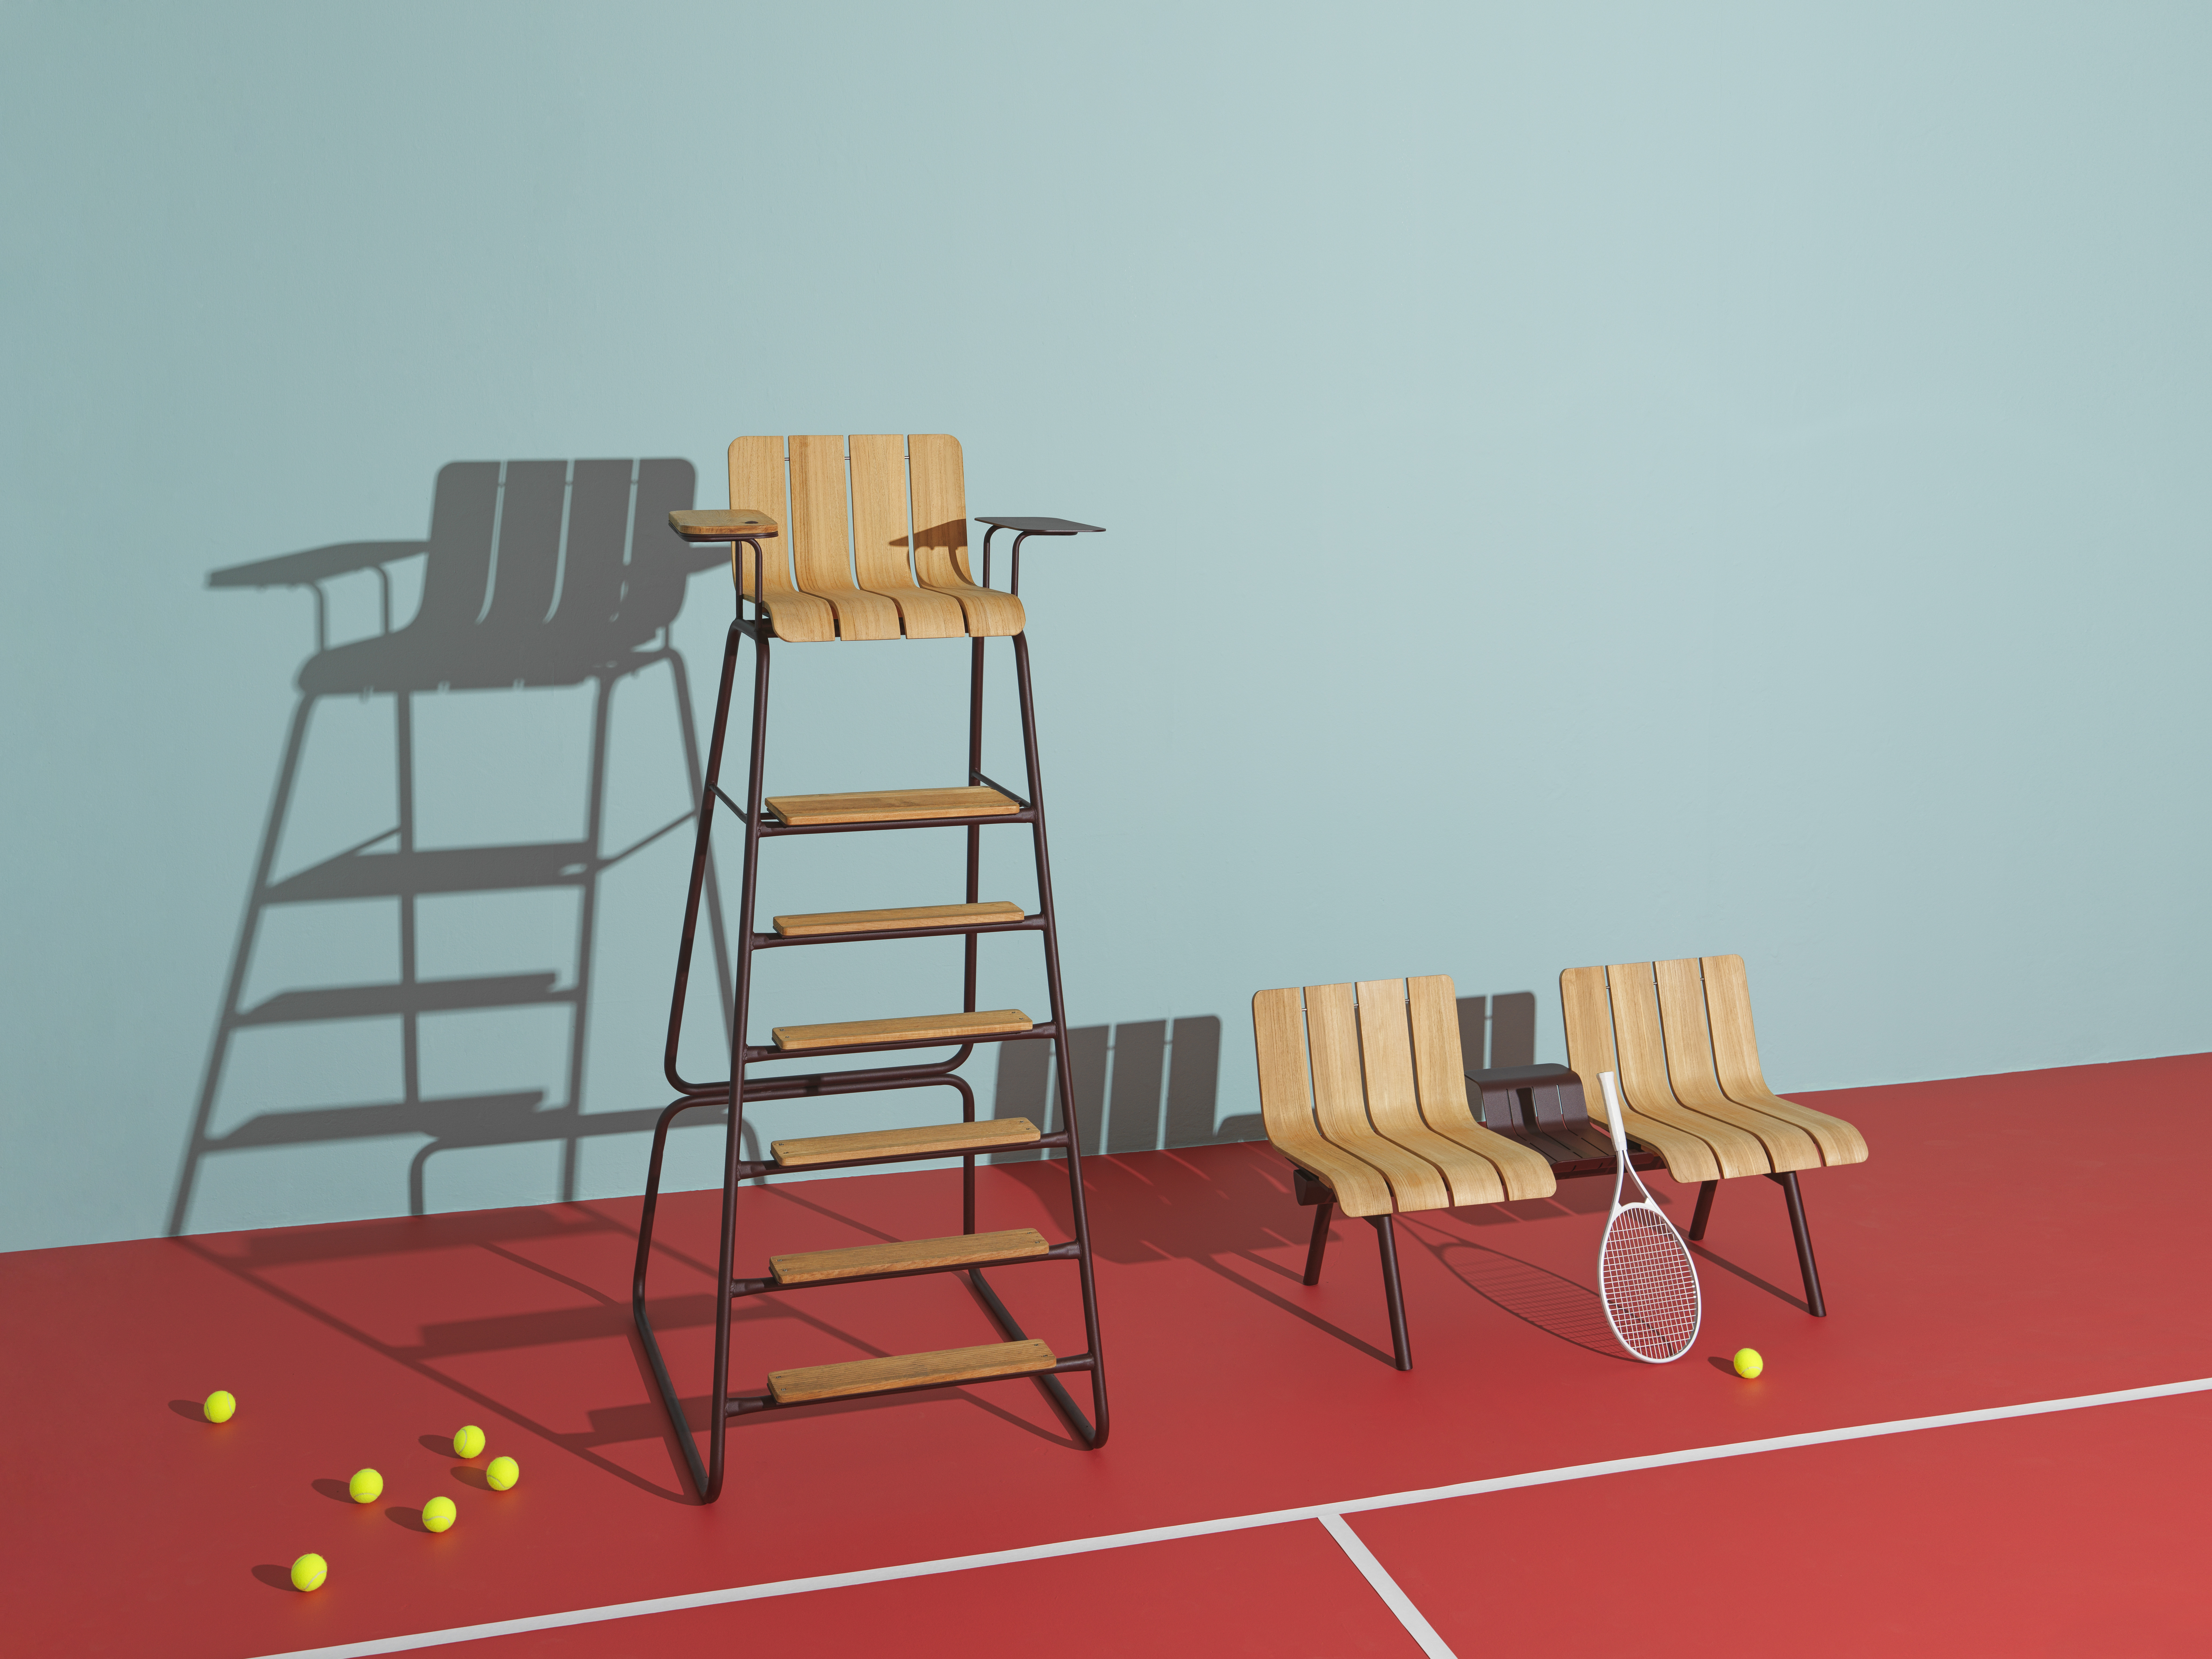 Ethimo Ace front view of umpire's chair with two-seater bench on red tennis court